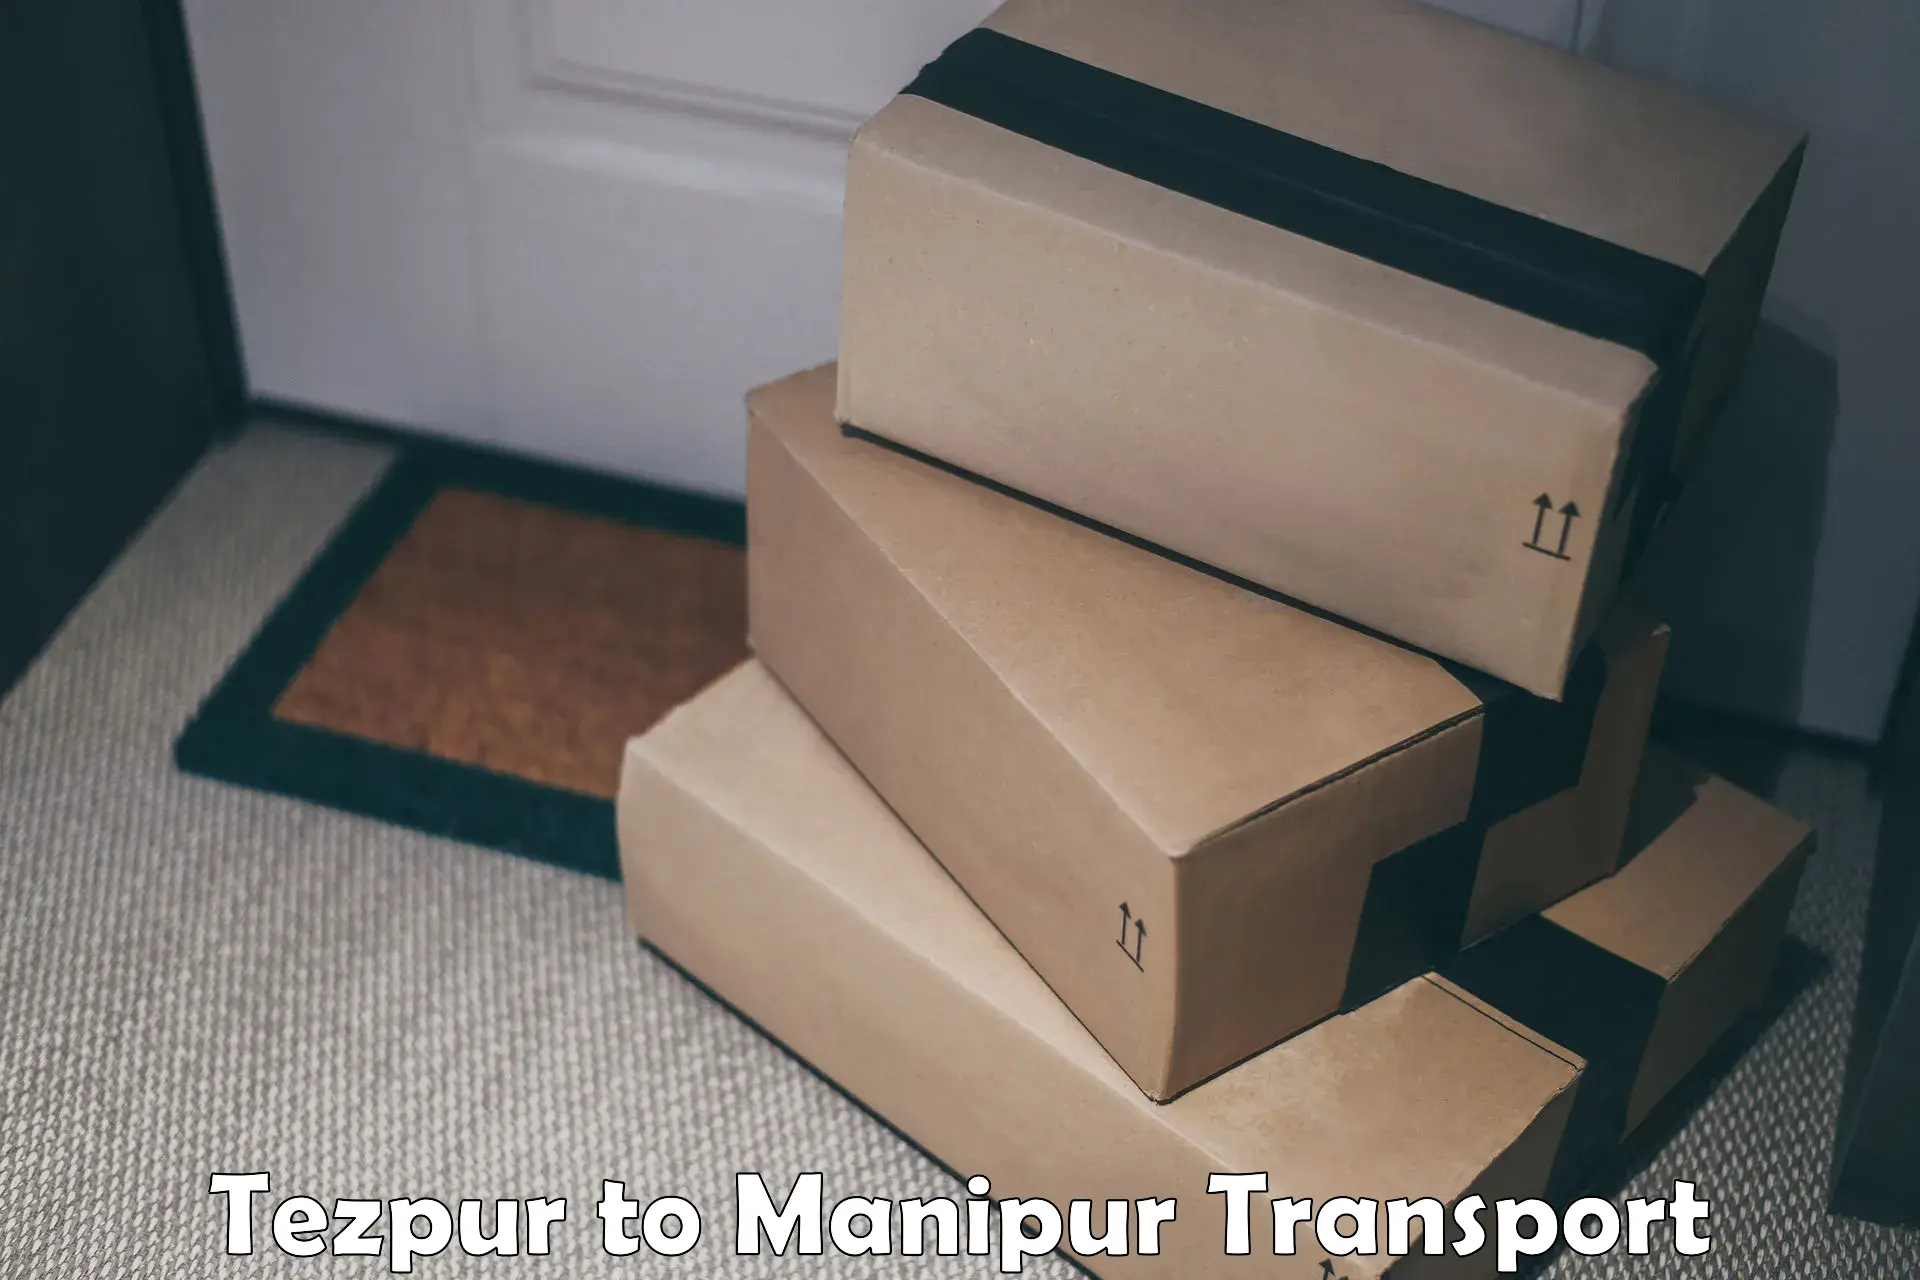 Daily transport service Tezpur to Moirang